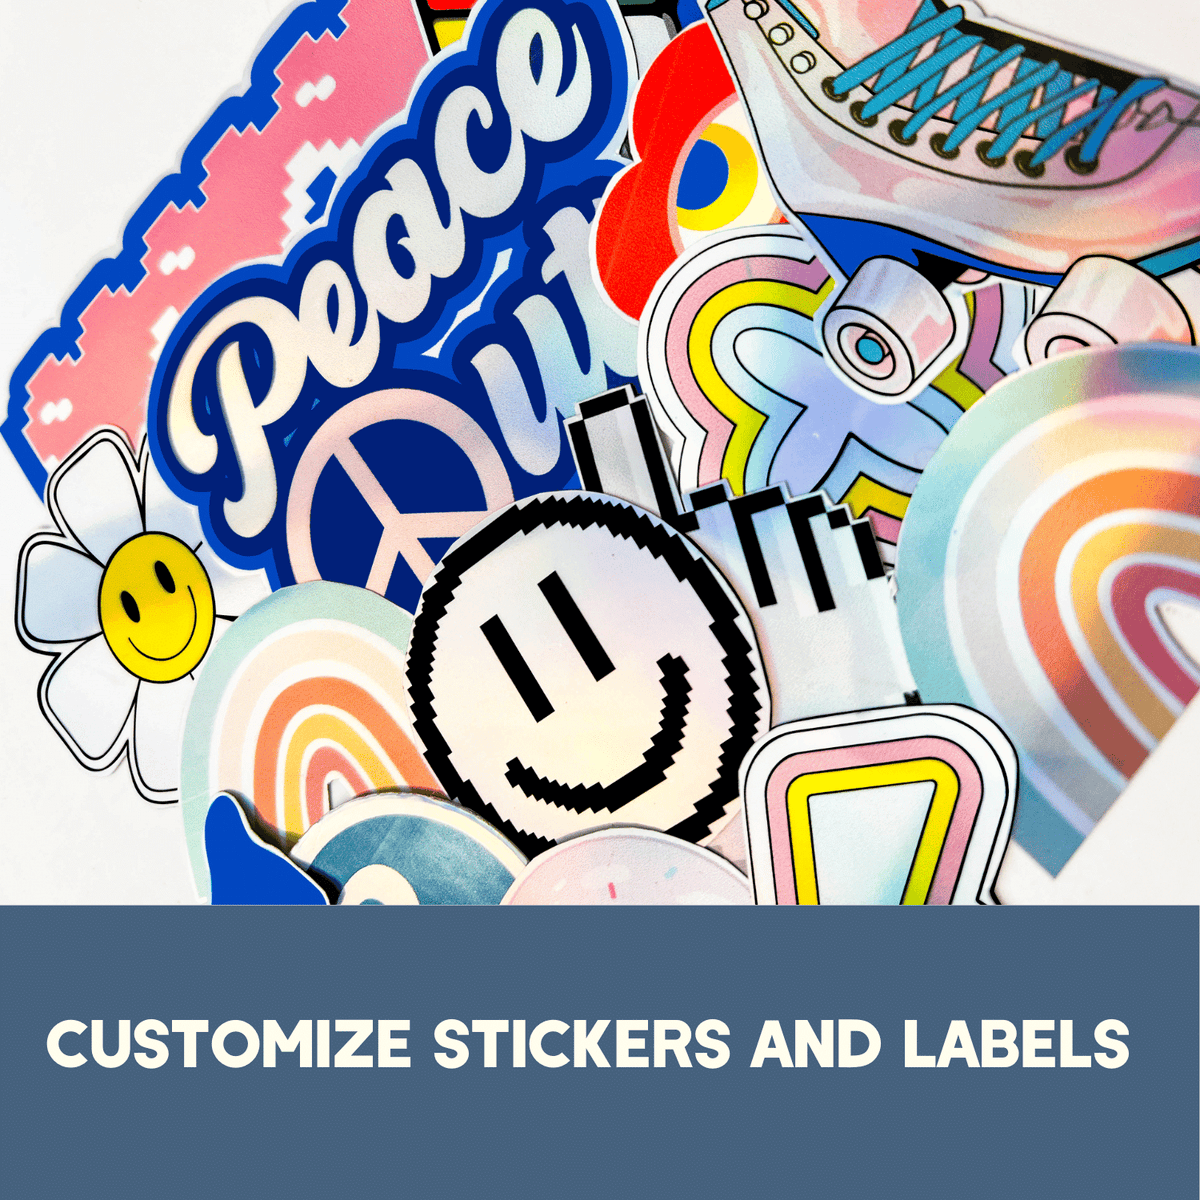 10/20/30/40/50/100 Sheets Holographic Sticker A4 Printable Vinyl